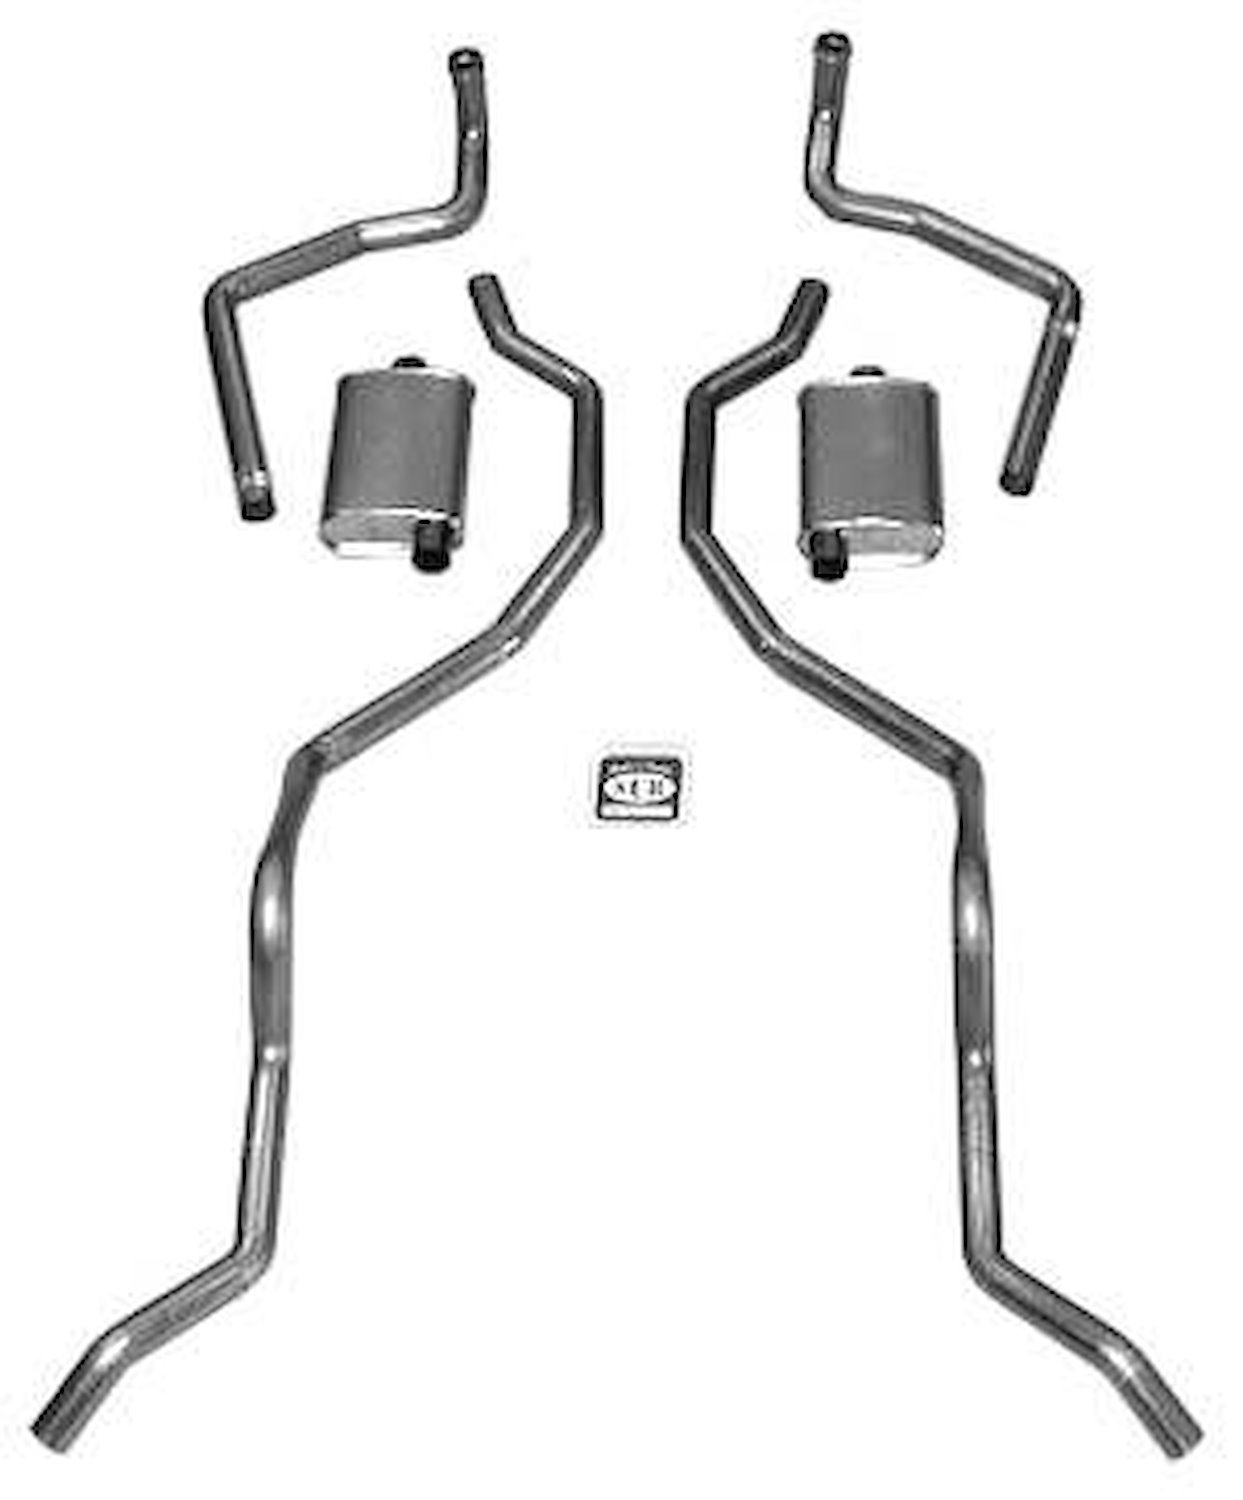 73050 1960-1964 Chevrolet Full-Size Exhaust System